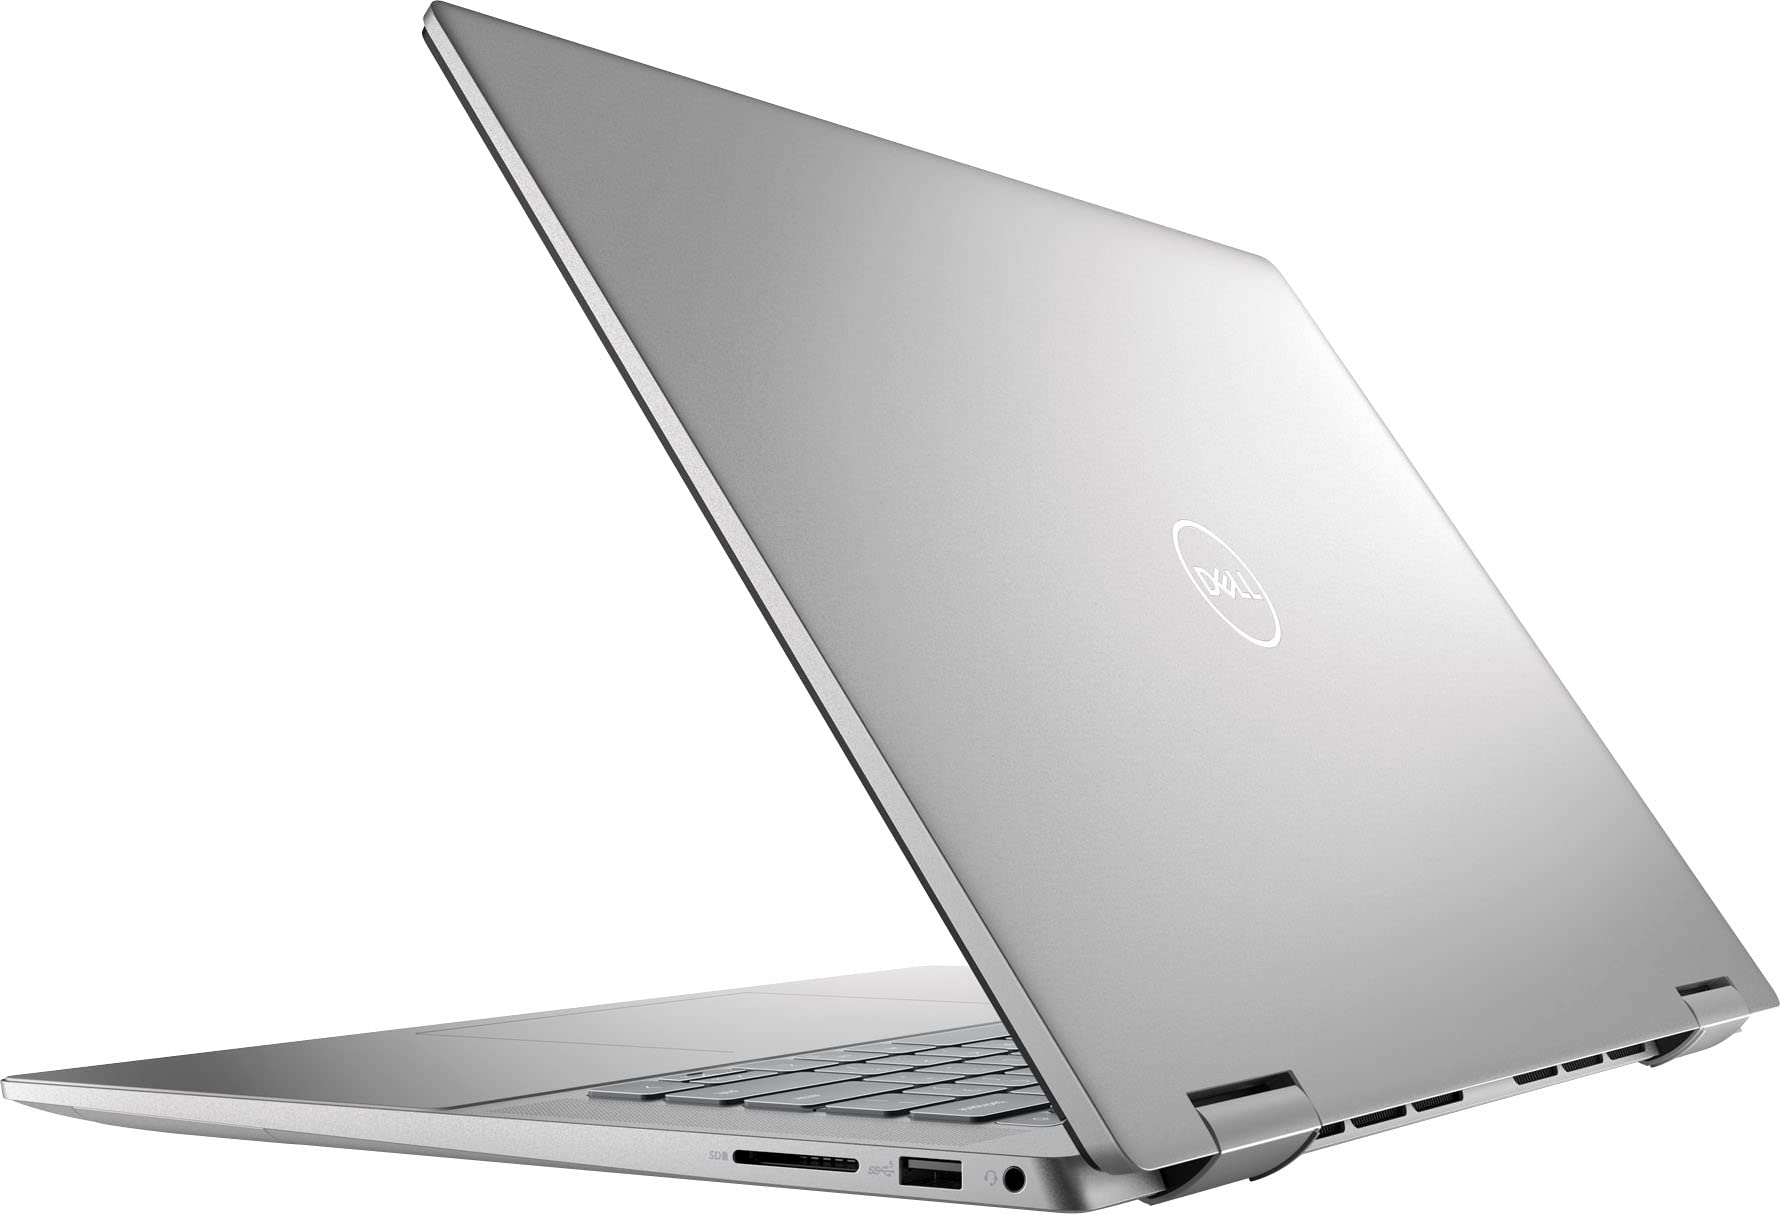 Dell Newest Inspiron 7620 2-in-1 Laptop, 16" FHD+ Touch Display, 12th Gen Intel Core i7-1260P, 64GB DDR4 RAM, 1TB PCIe SSD, FHD Webcam, HDMI, Backlit KB, FP Reader, Wi-Fi 6, Windows 11 Home, Silver